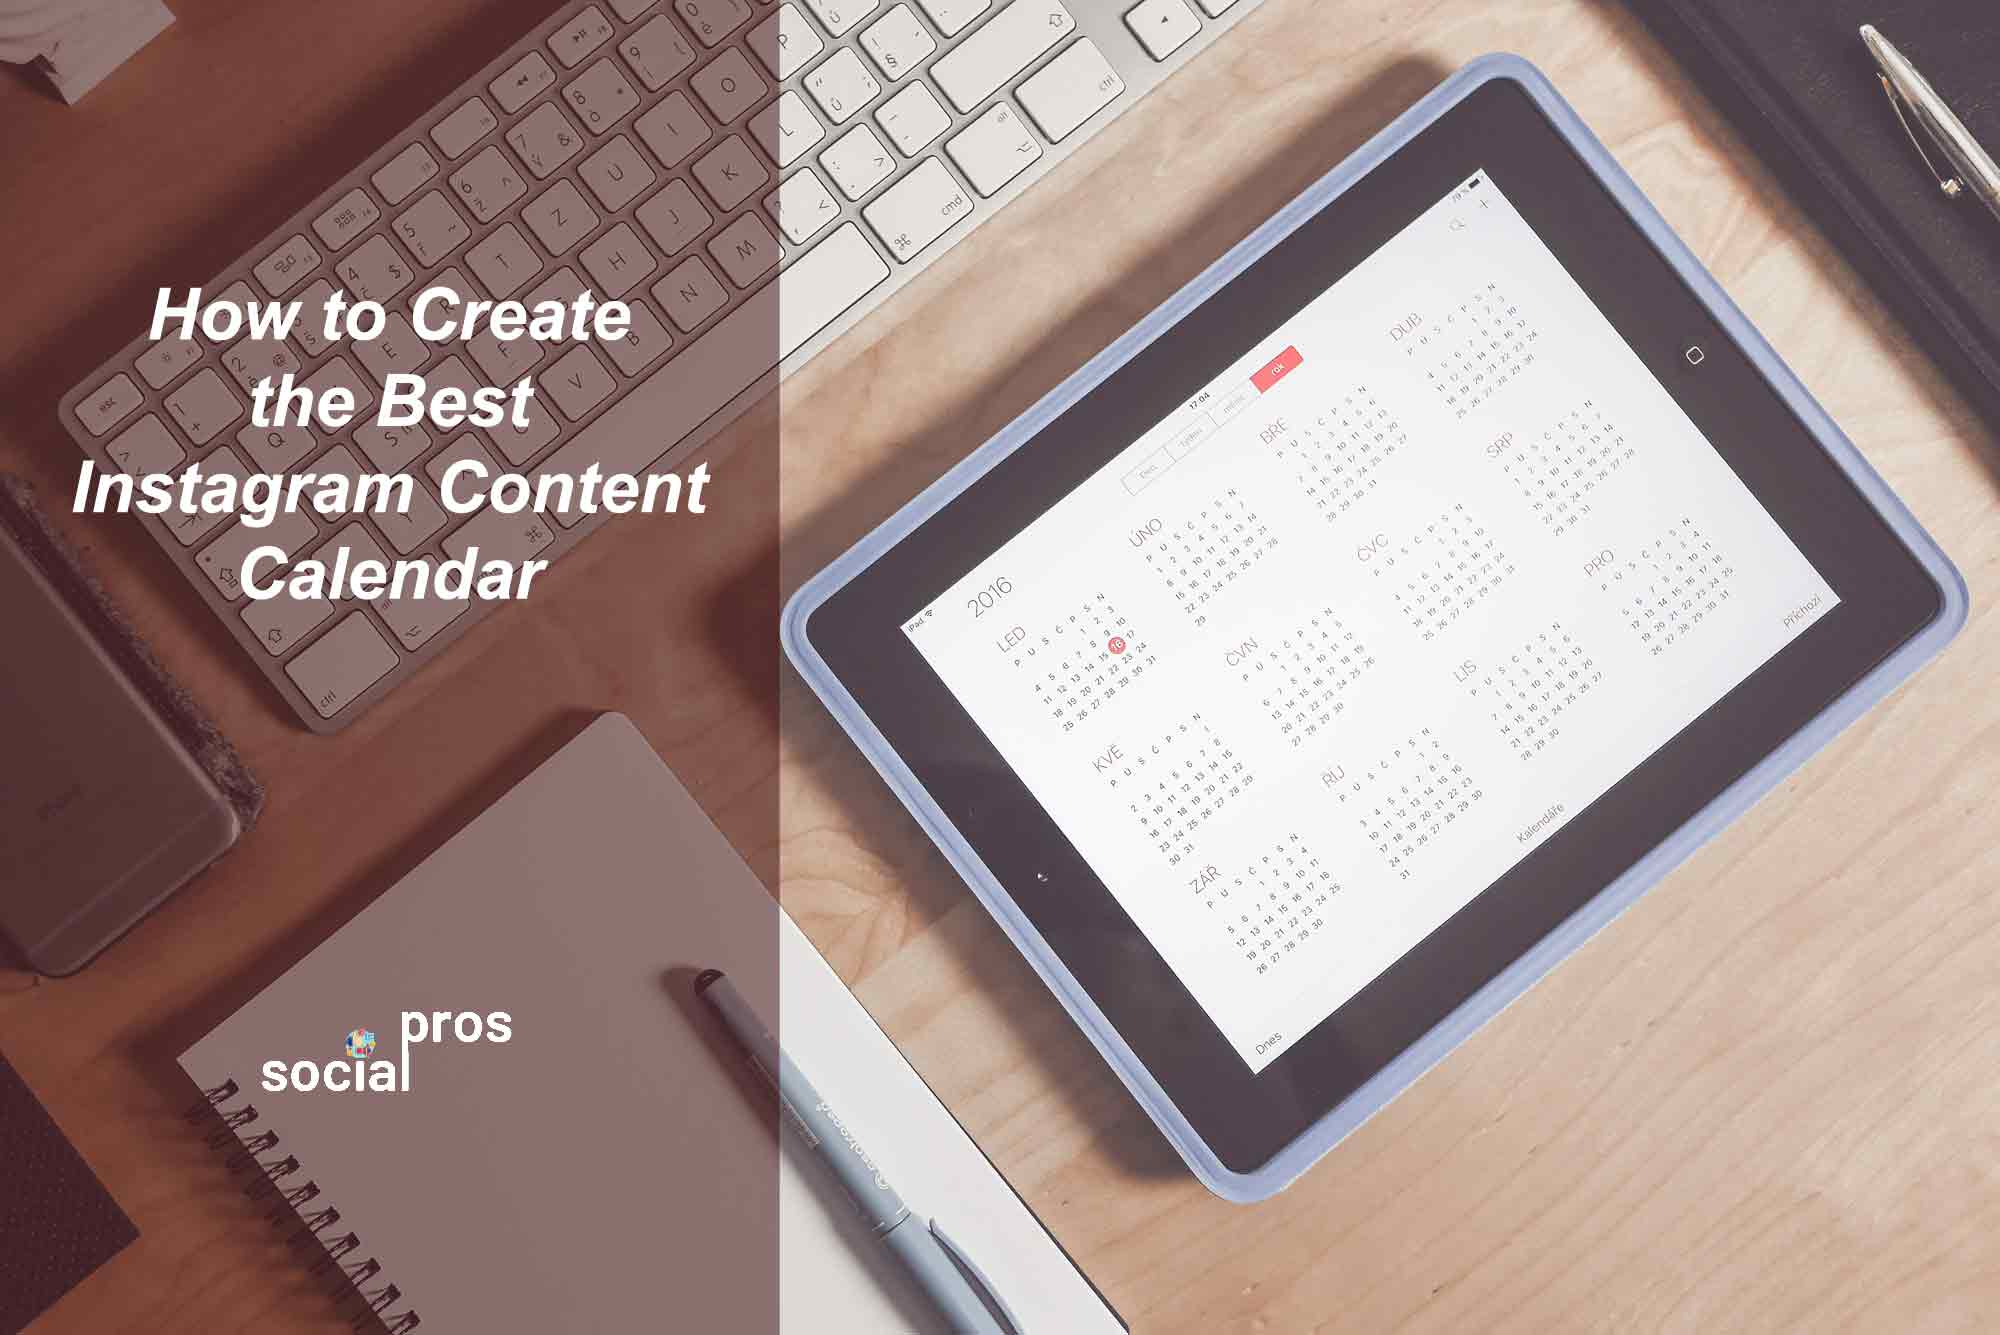 How to Create the Best Instagram Content Calendars for Free